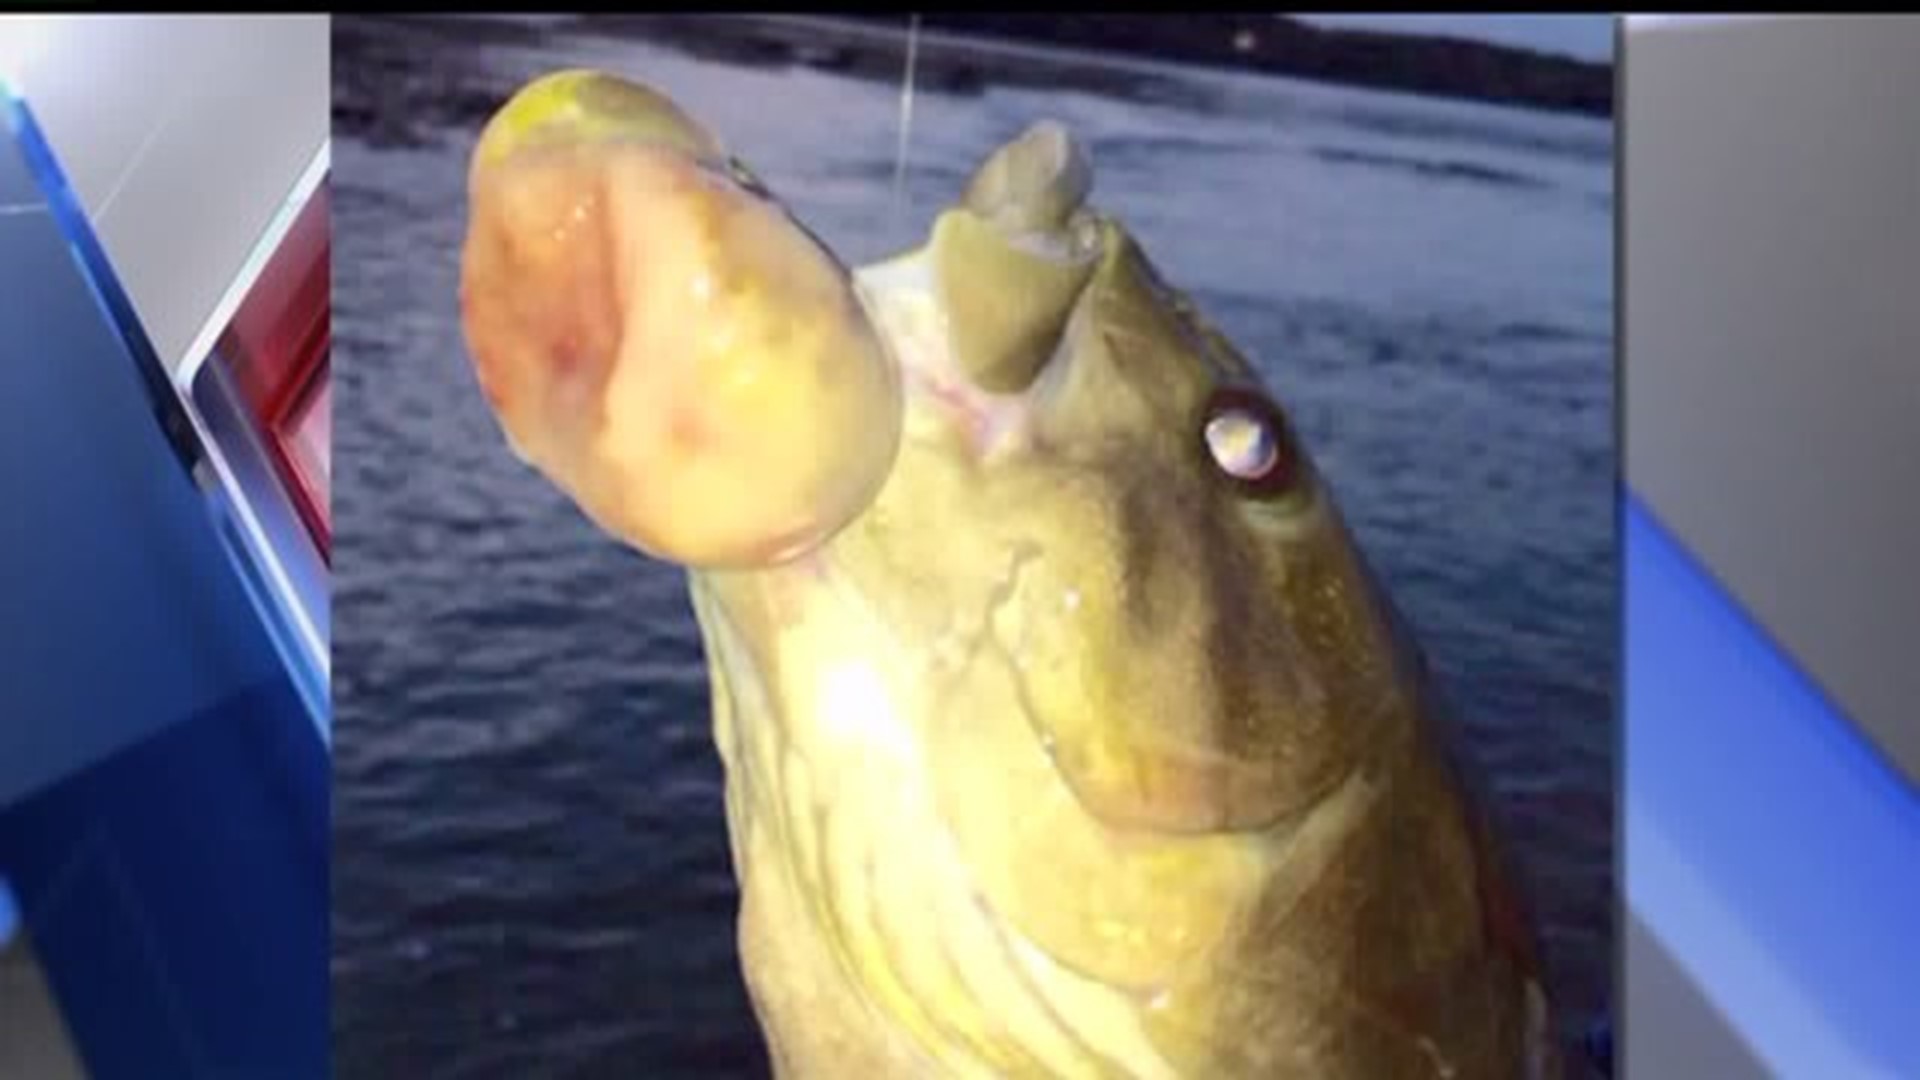 Fish Caught in Susquehanna River Tests Positive for Cancer